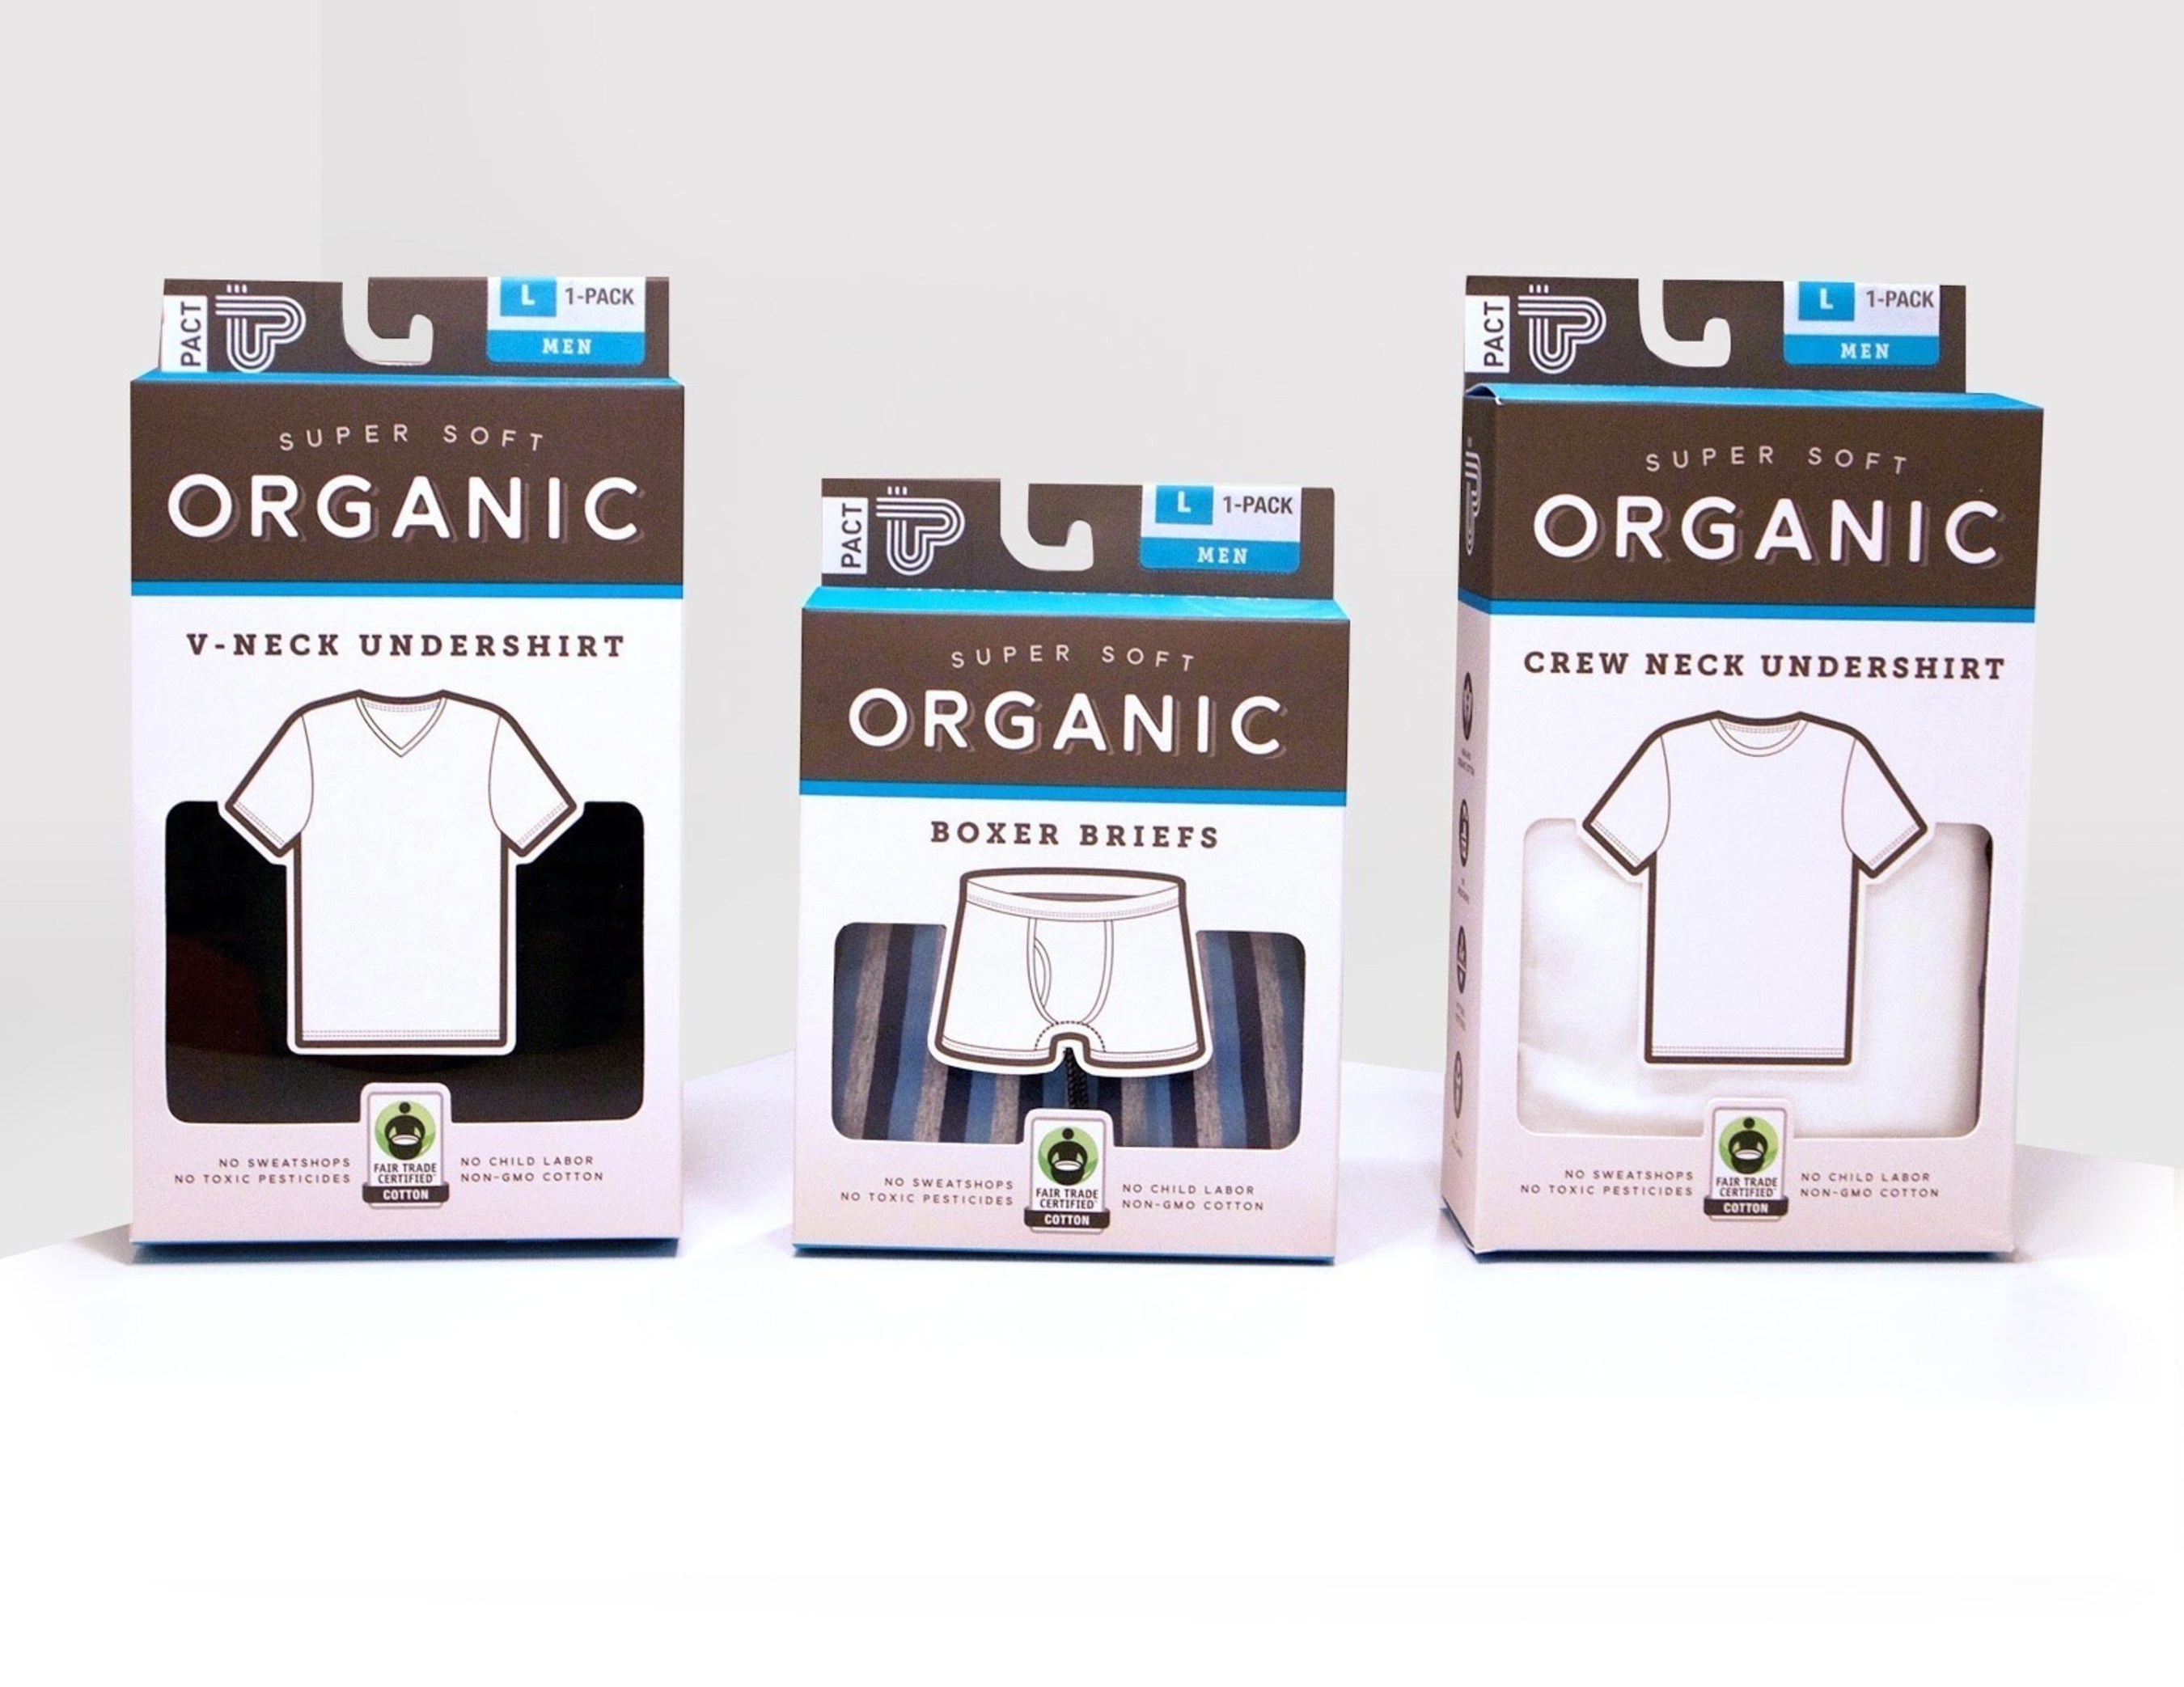 PACT  ORGANIC launches First Fair Trade Certified™ Line of Organic Cotton  Clothing at Target